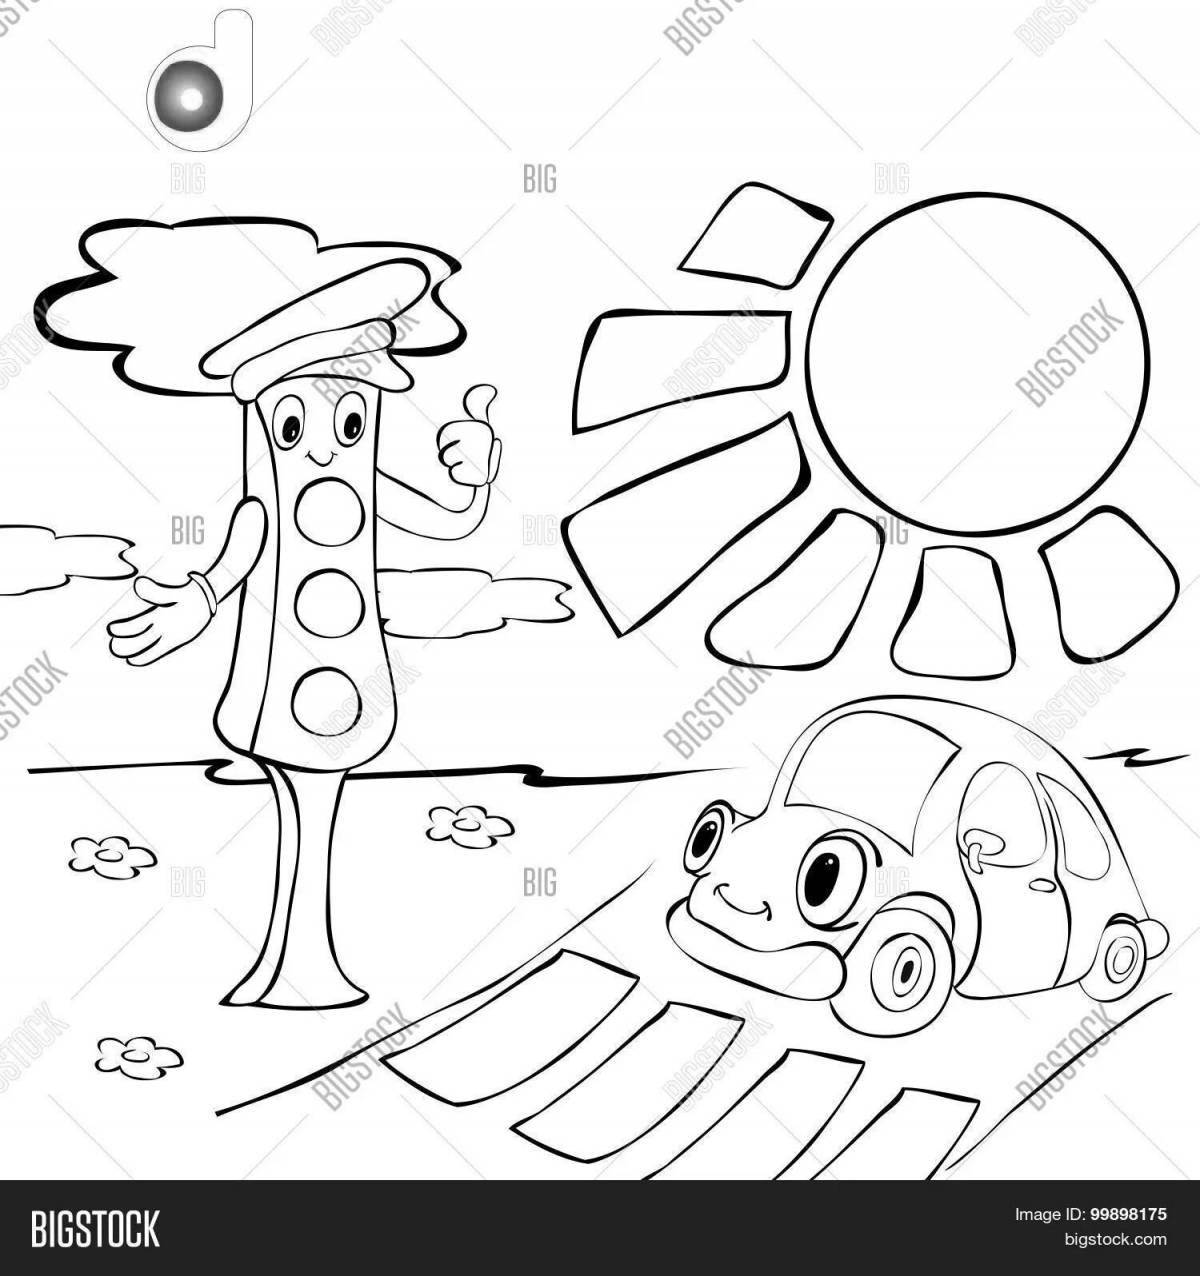 Innovative traffic light coloring page for kids